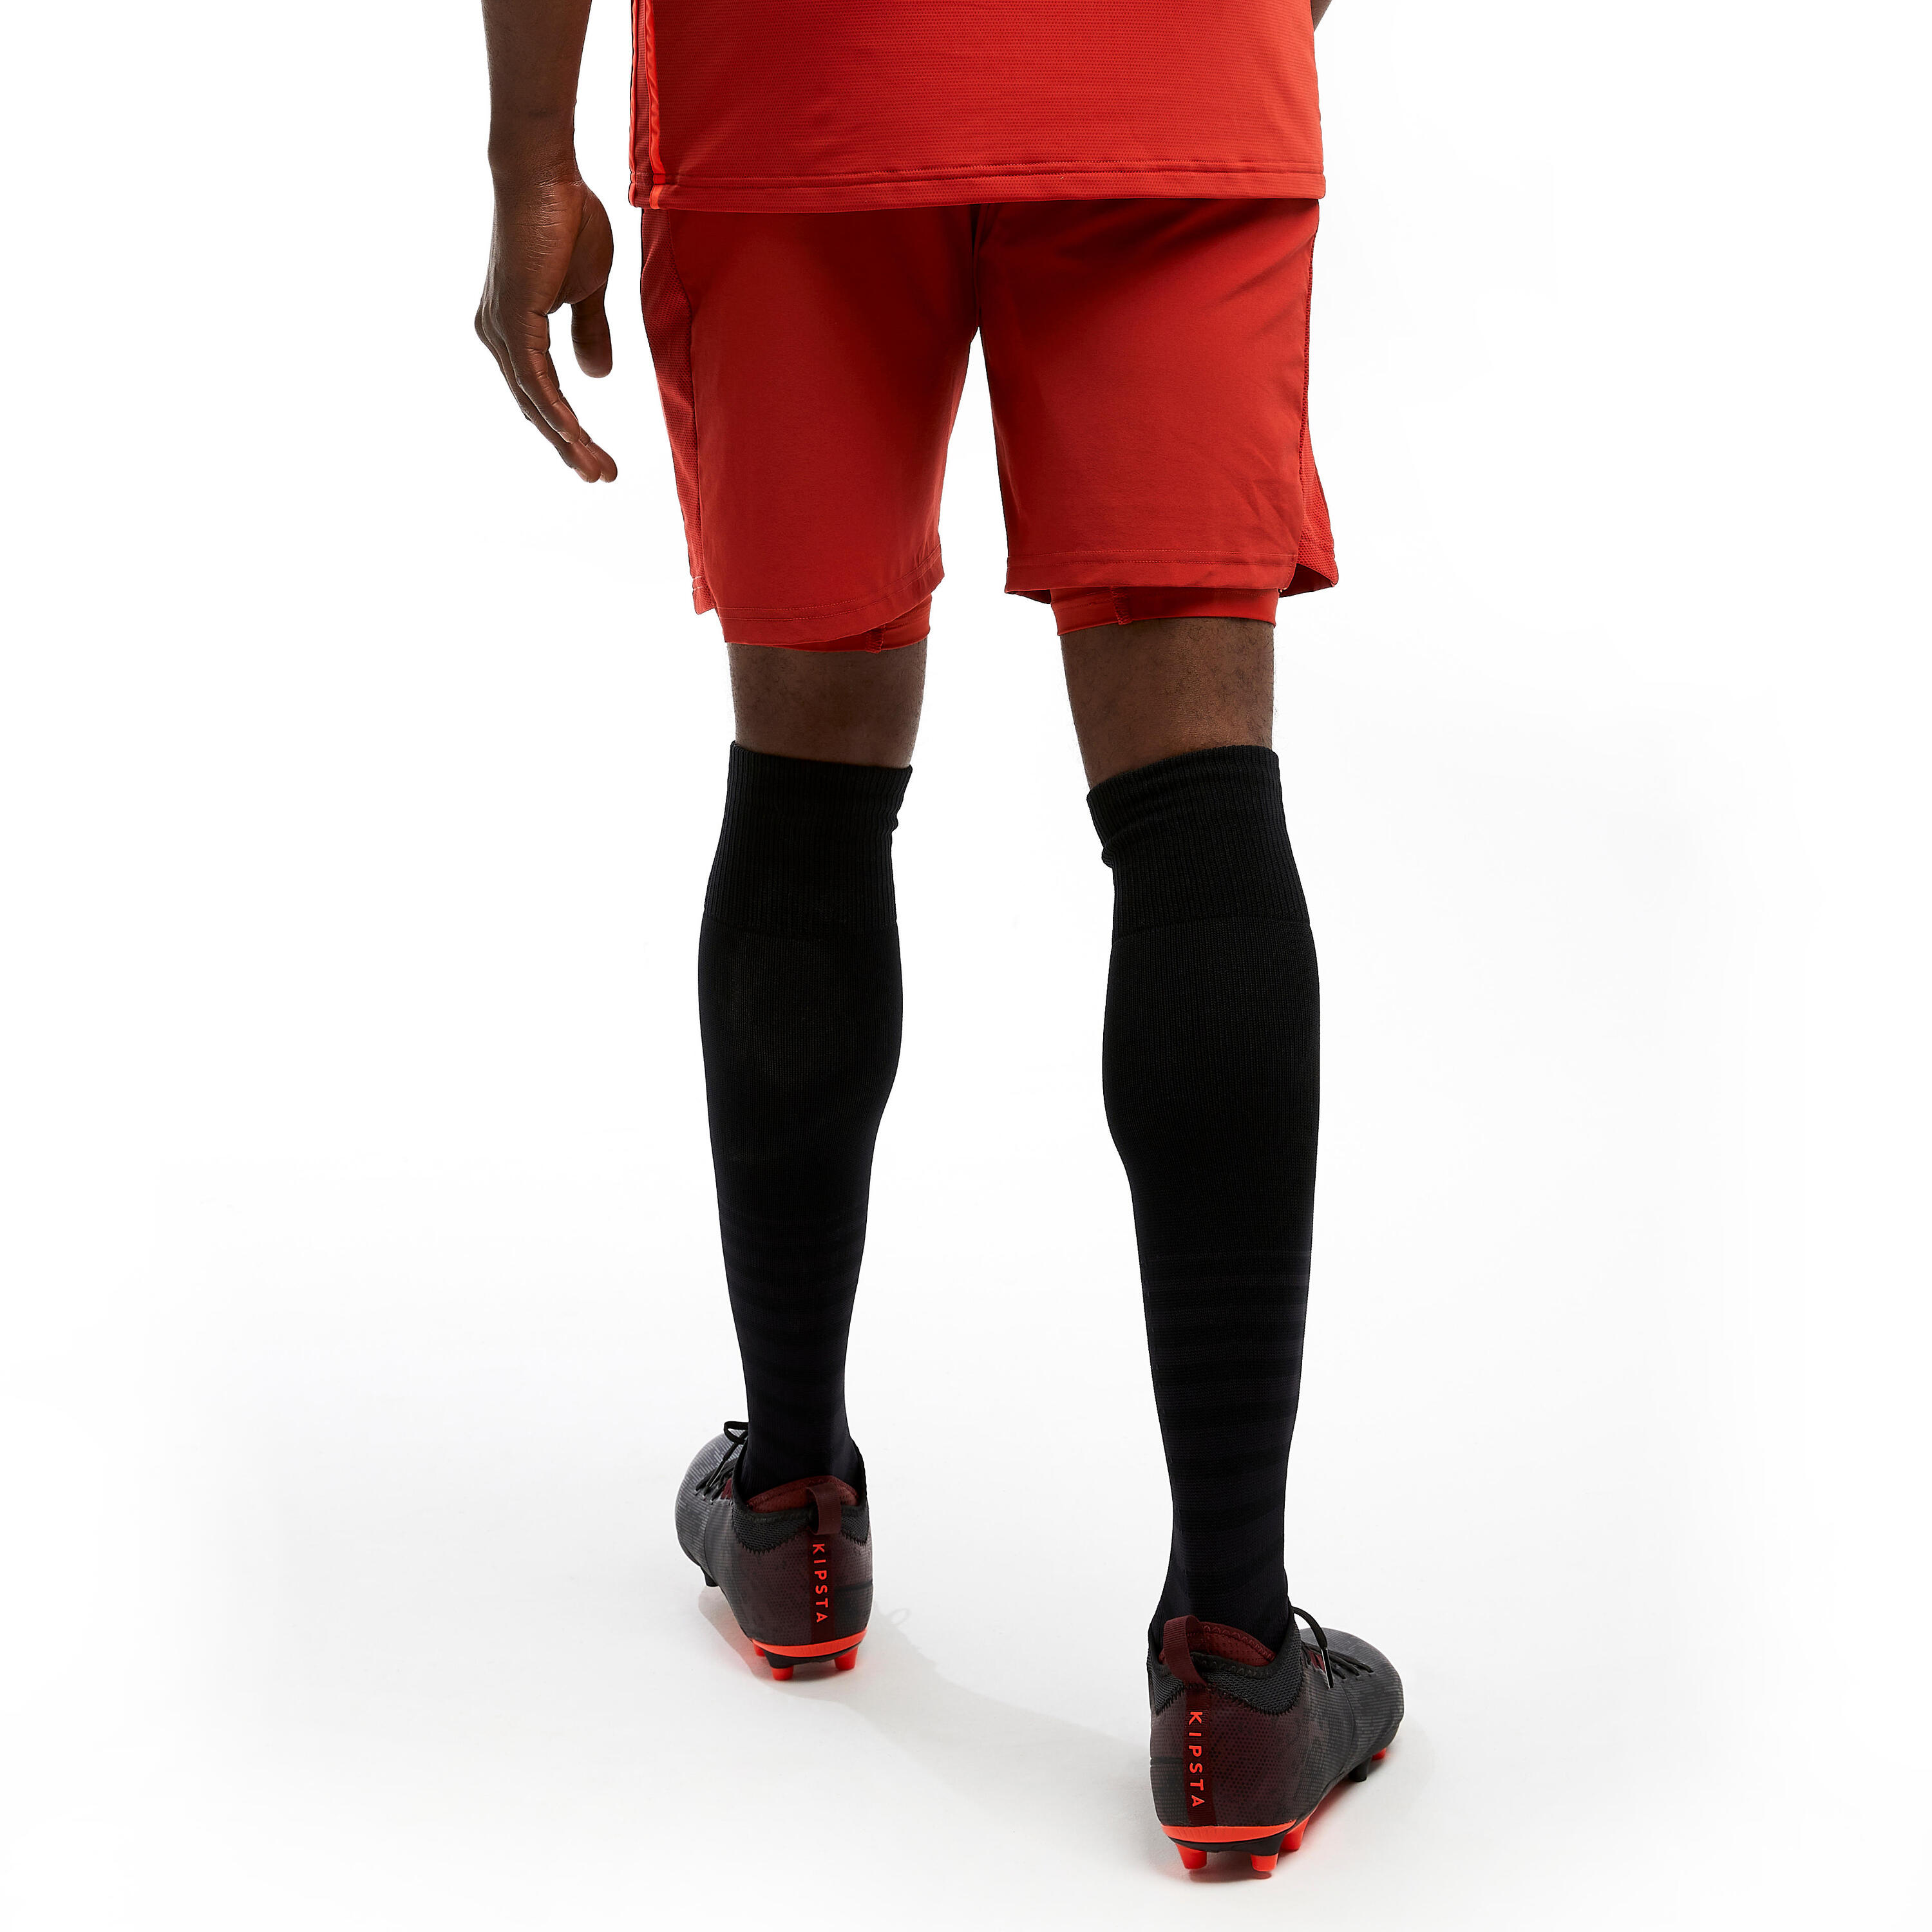 Adult 3-in-1 Football Shorts Traxium - Red 5/8